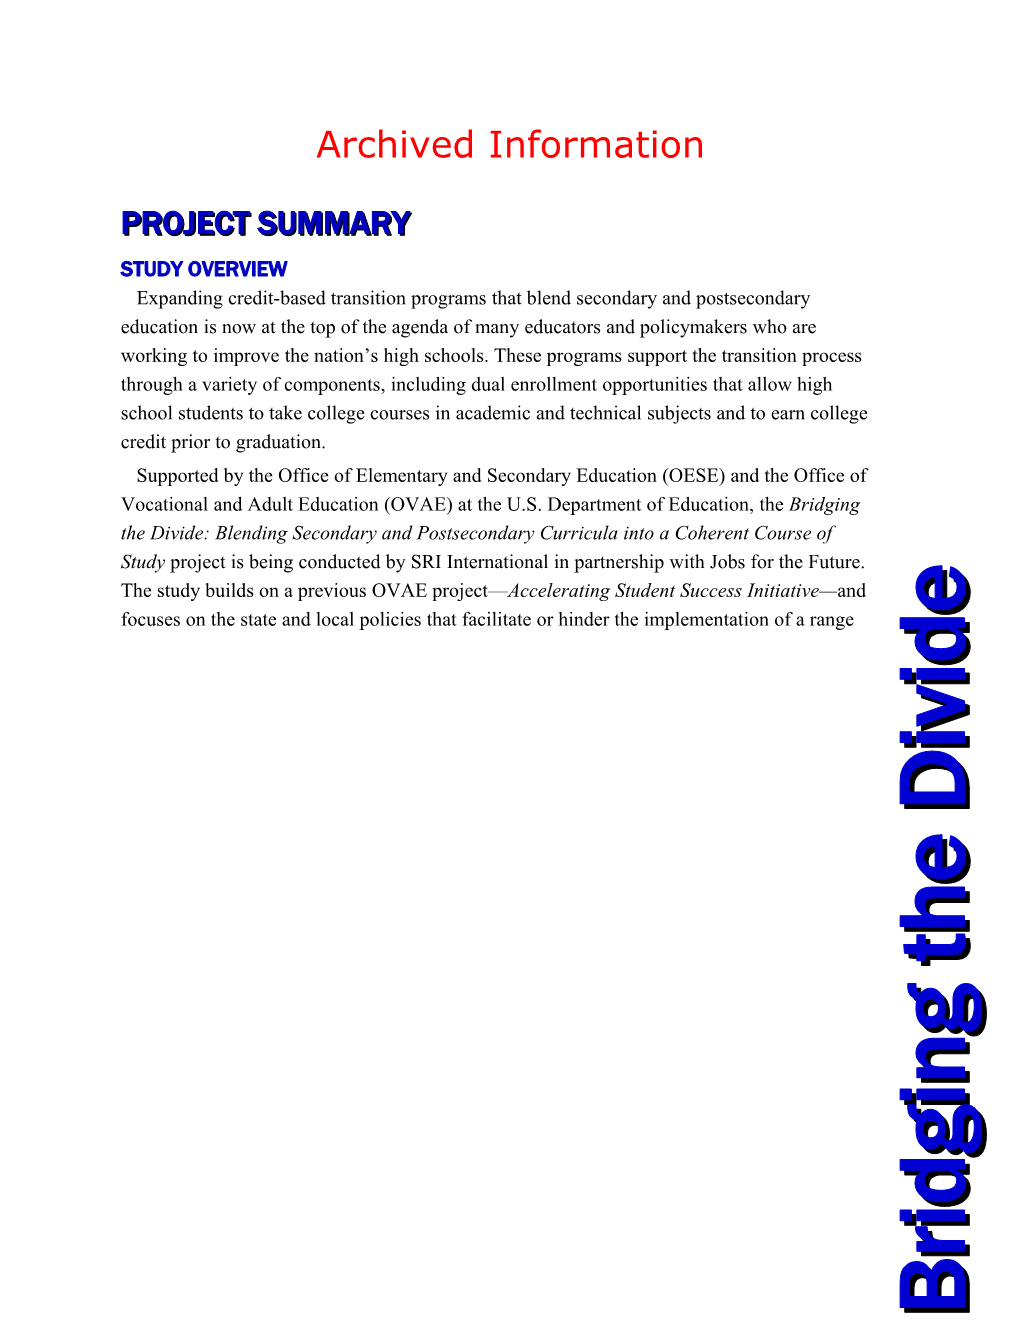 Archived: Project Summary: Bridging the Divide (MS Word)